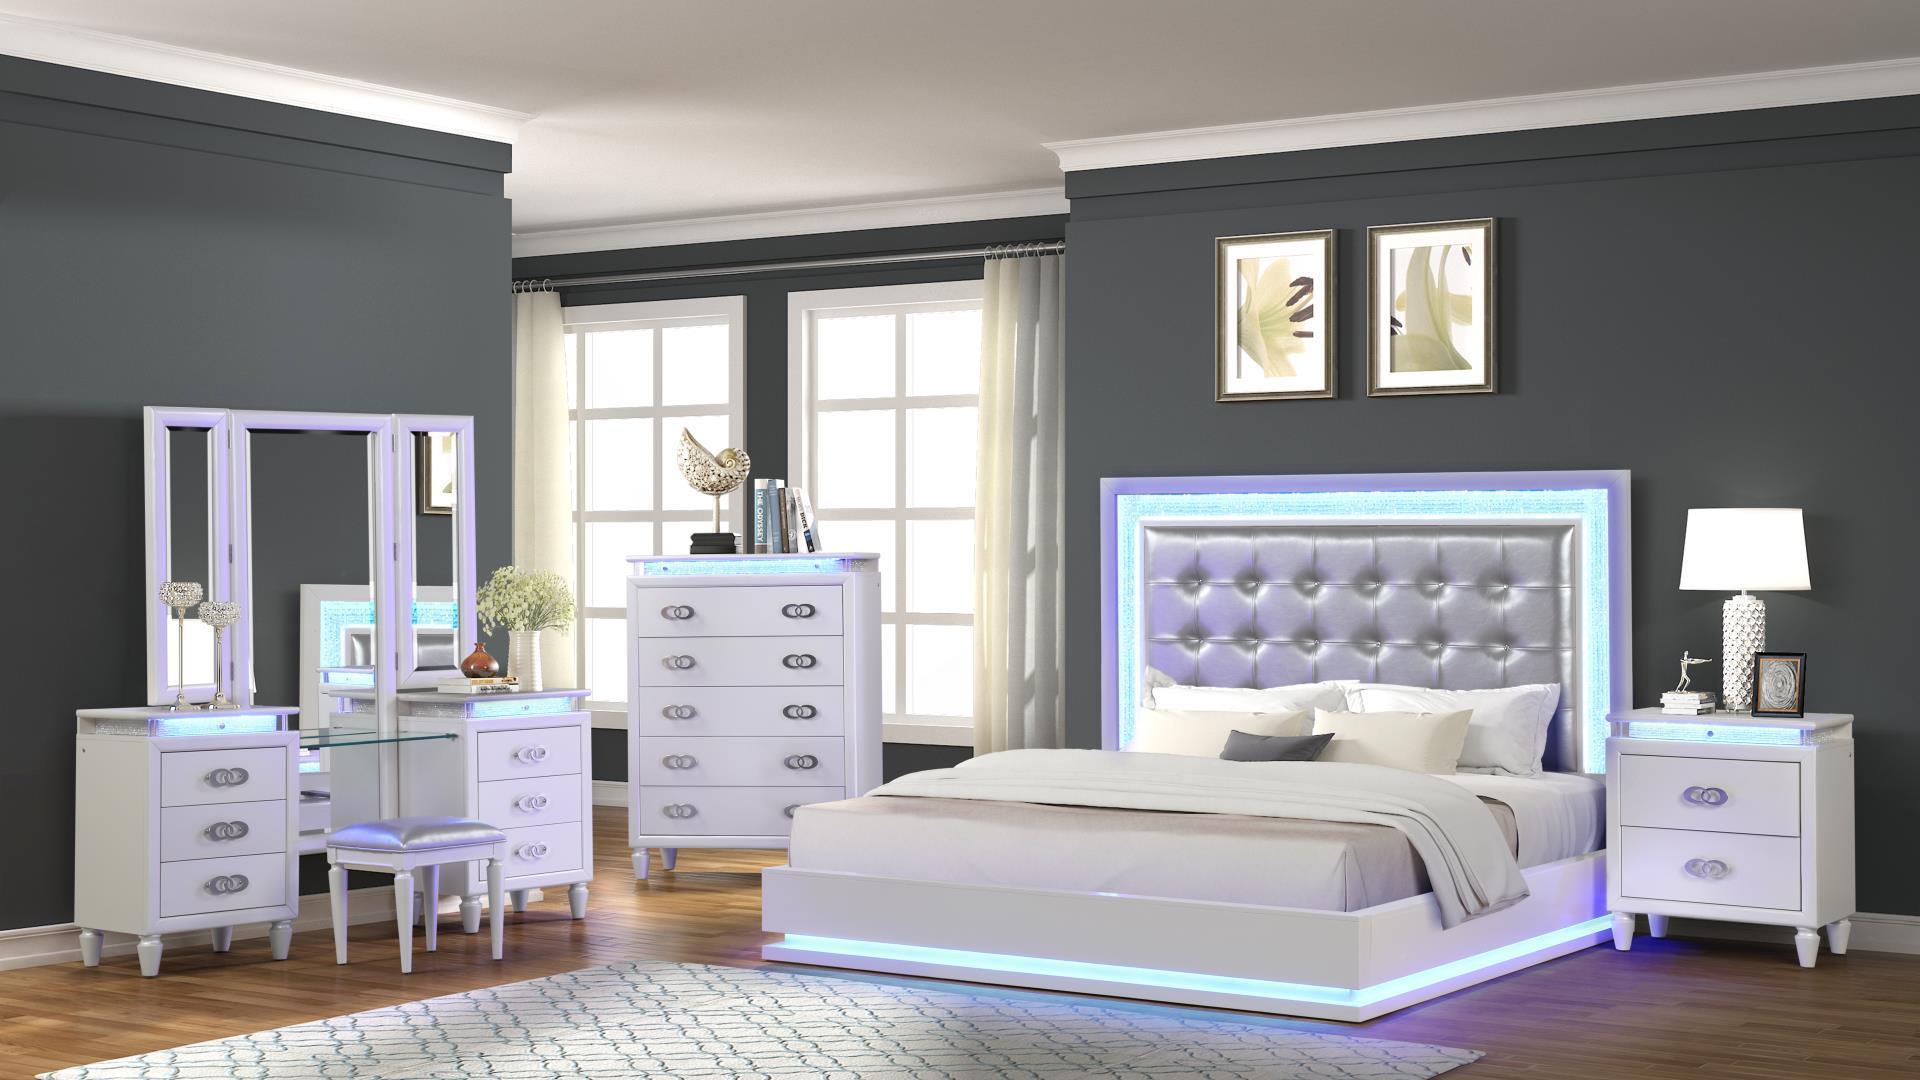 

    
Milky White Tufted King Led Bed Set w/Vanity 5P PASSION Galaxy Home Contemporary
